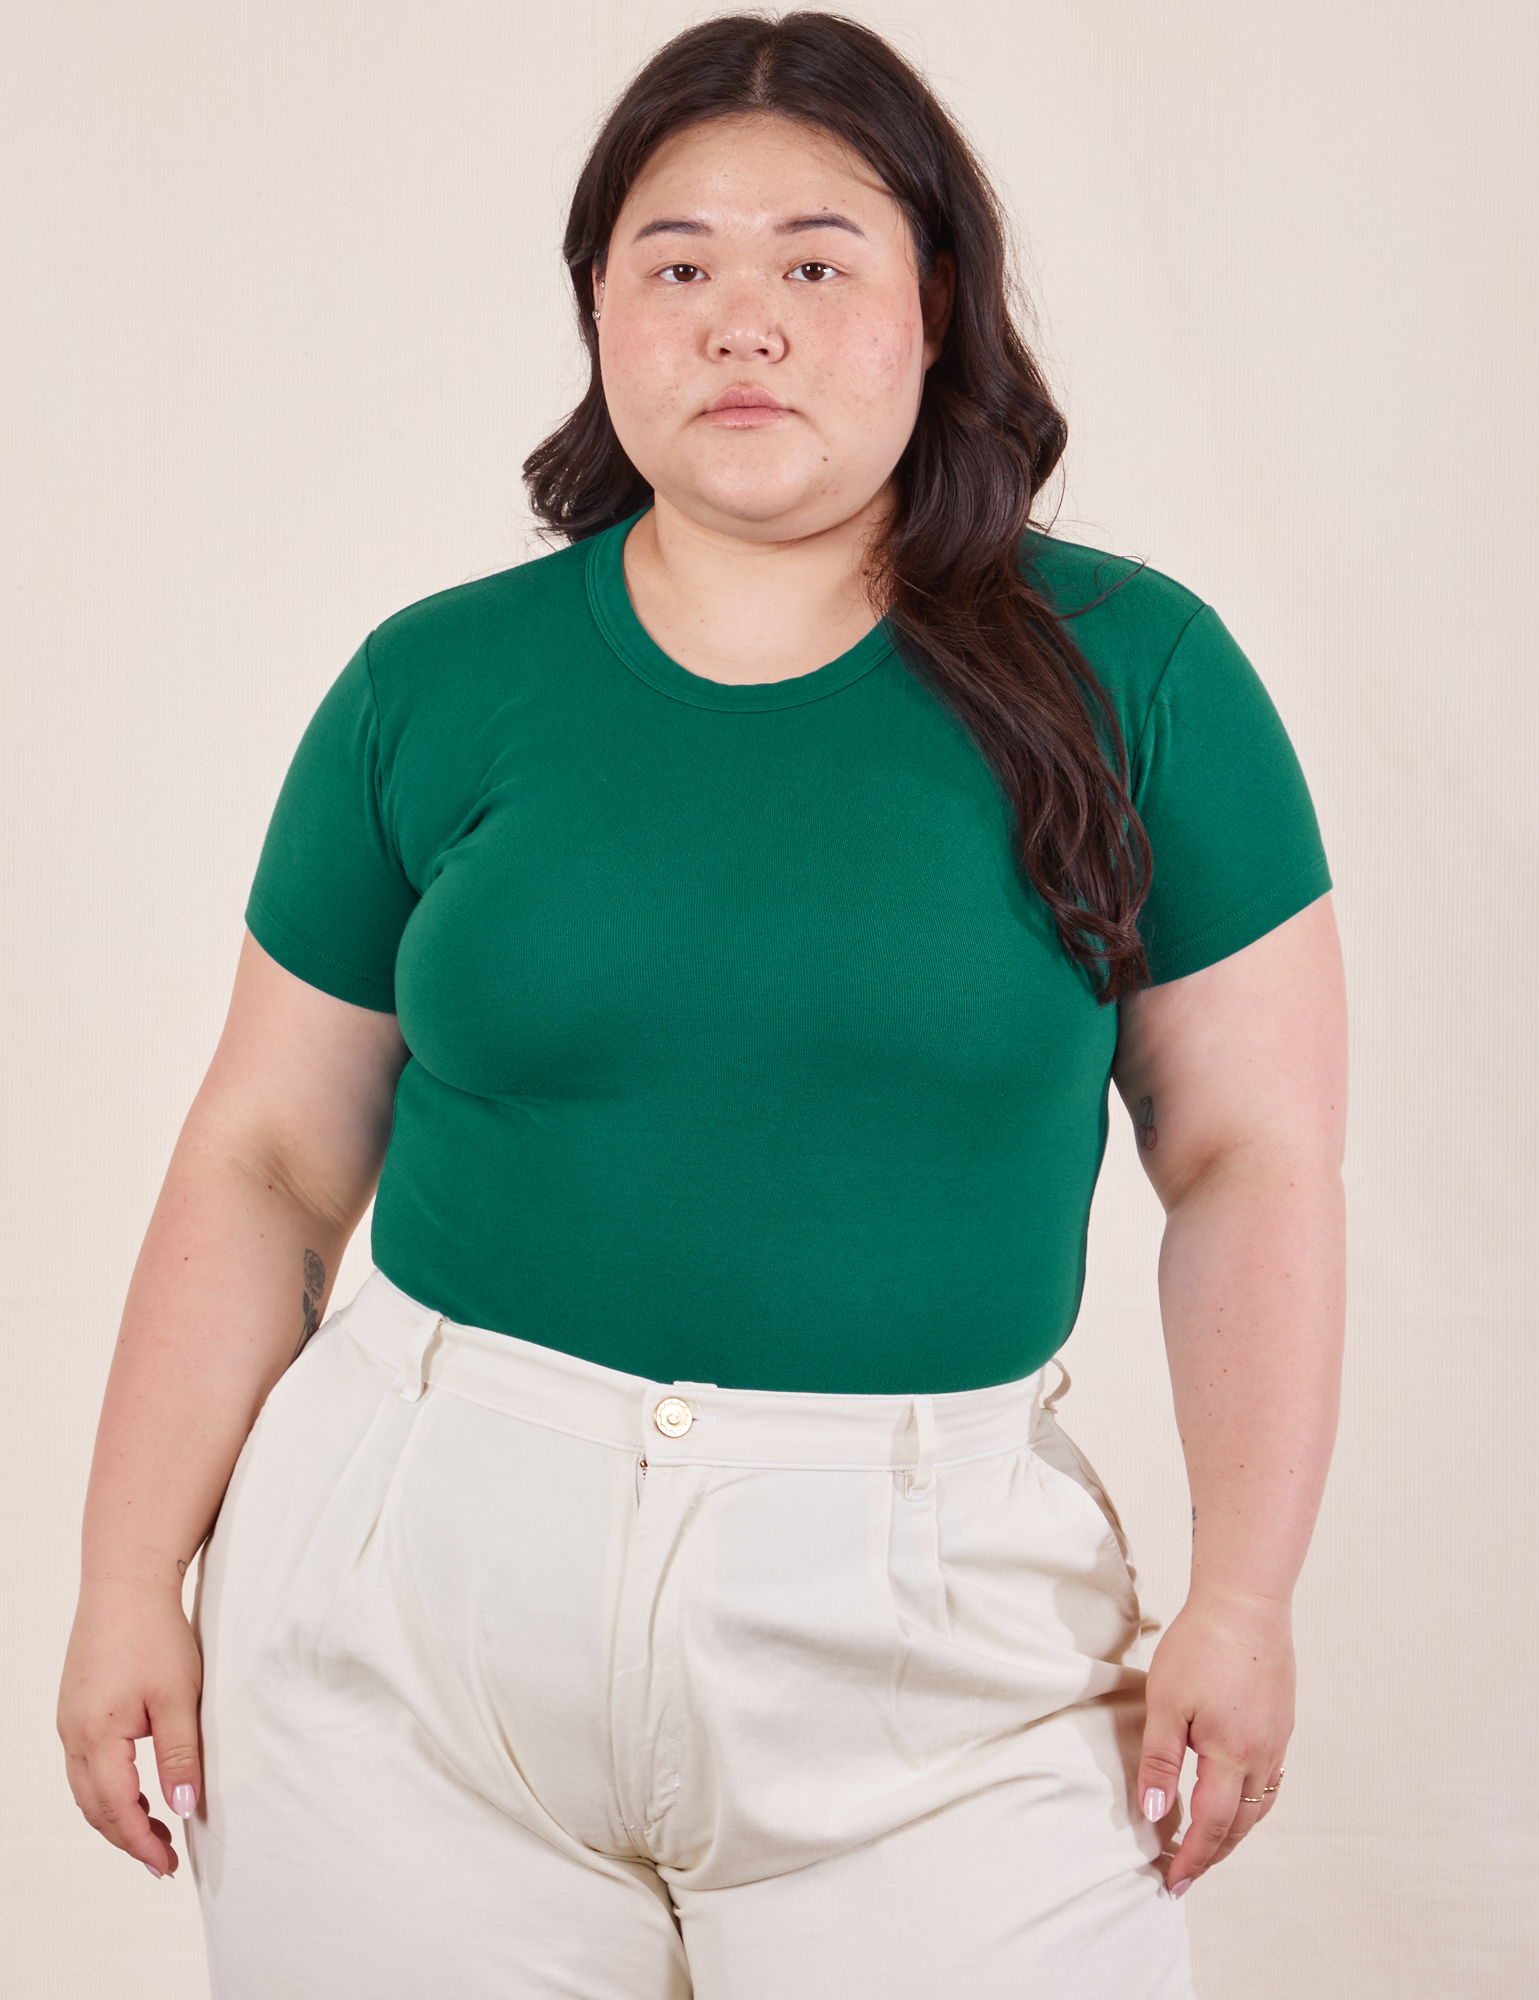 Ashley is wearing Baby Tee in Hunter Green tucked into vintage off-white Heavy Weight Trousers